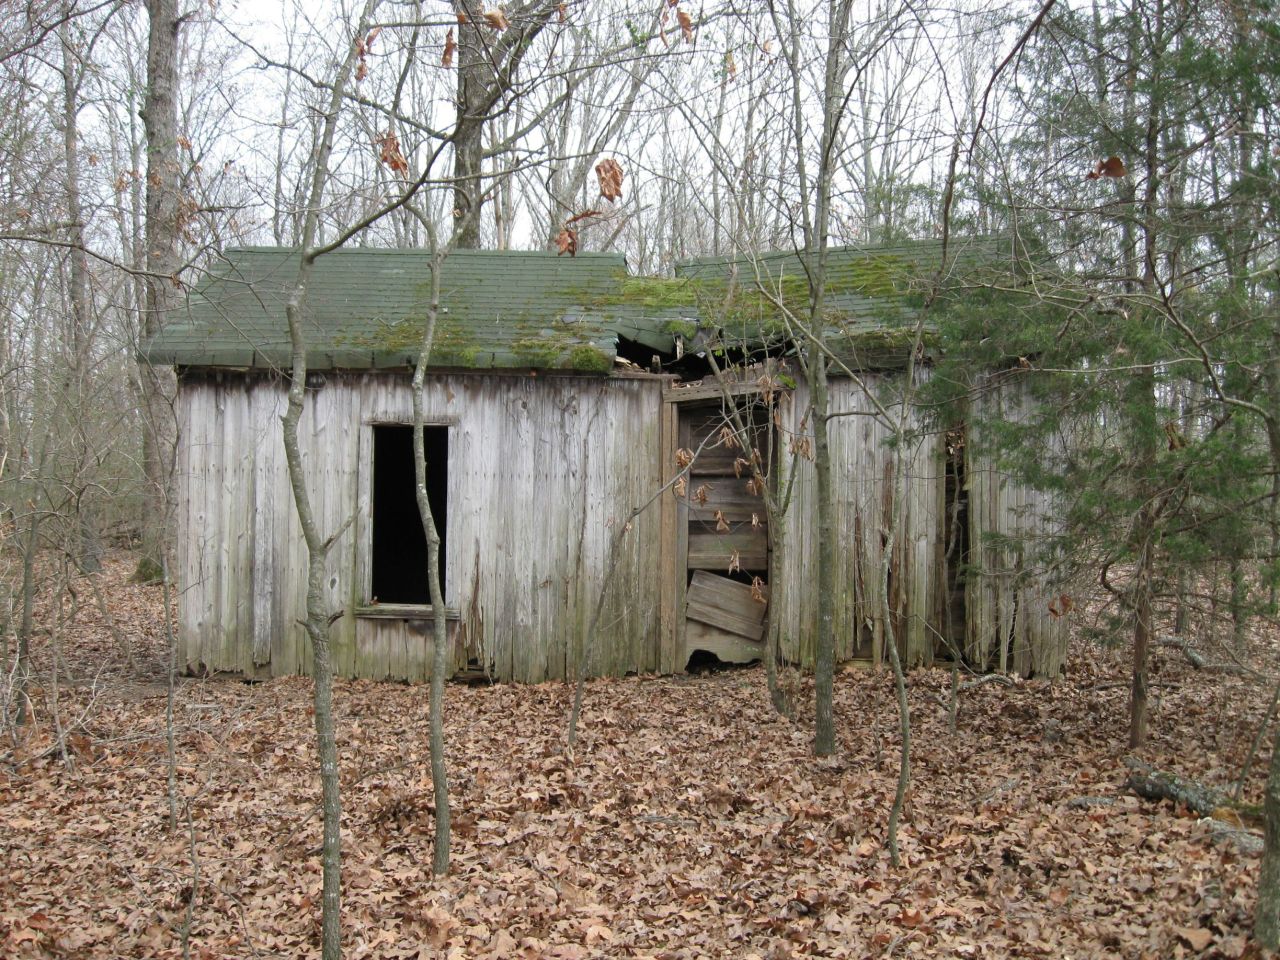 shack in the middle of the woods